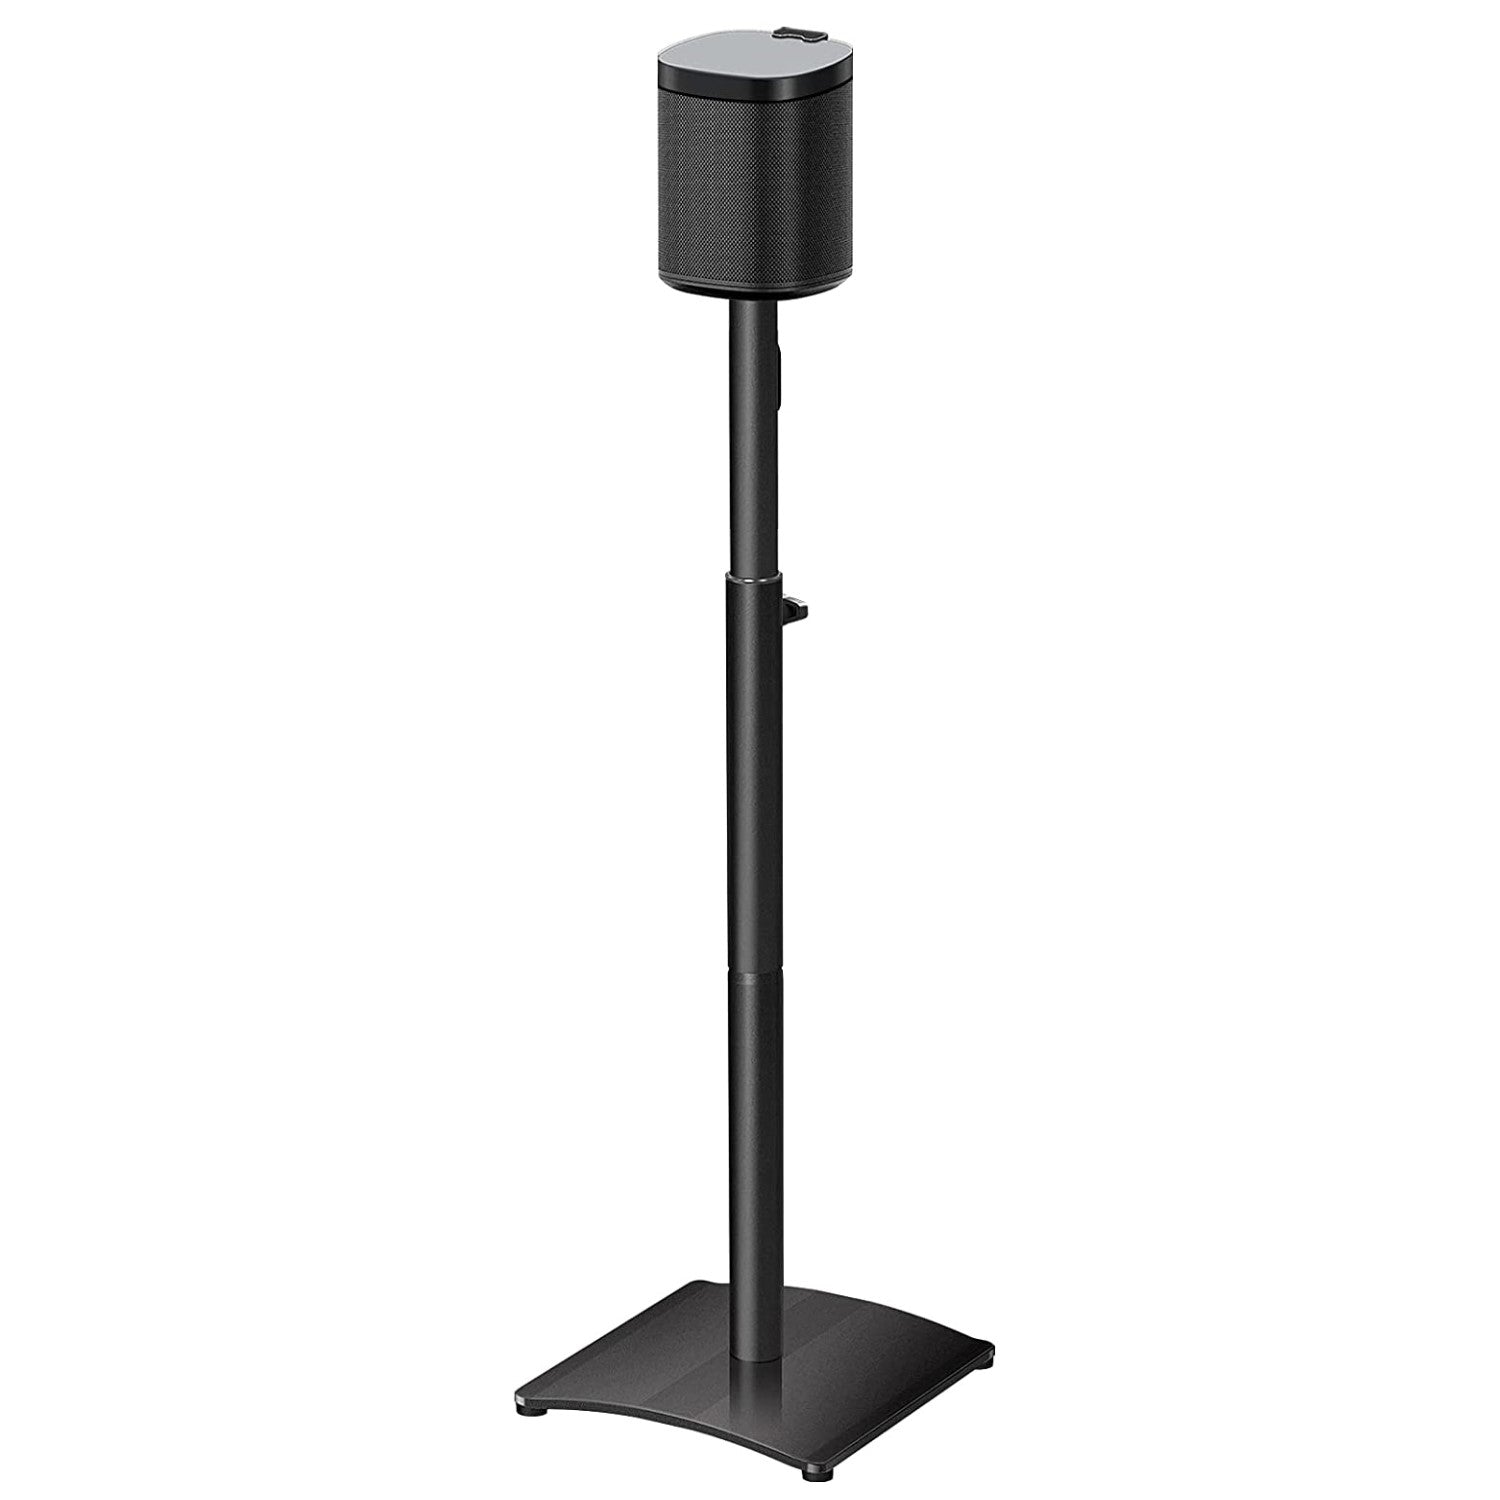 1 Speaker Stands for SONOS ONE, ONE SL, Play:1